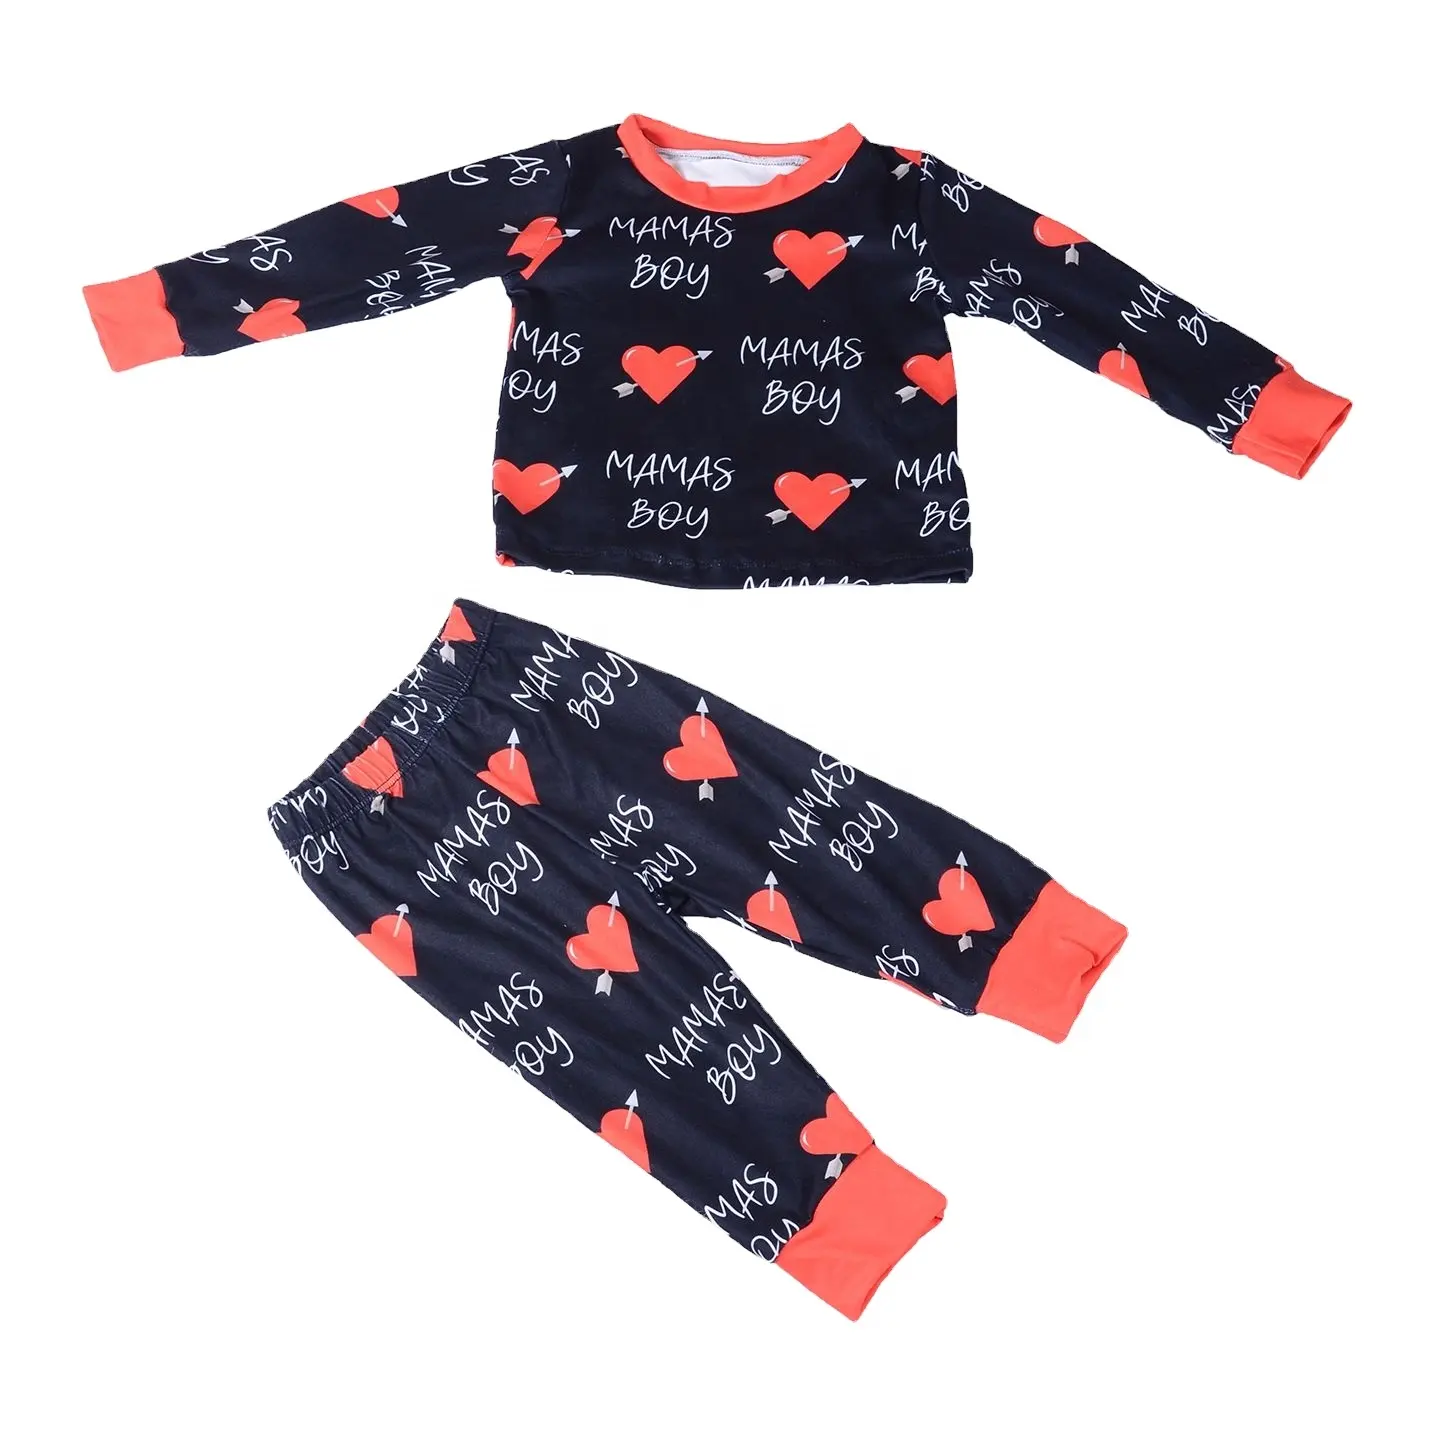 Wholesale Customized Name and Design Valentine's Day Children's Sleepwear Family Pajama Set with Trousers for Sleep